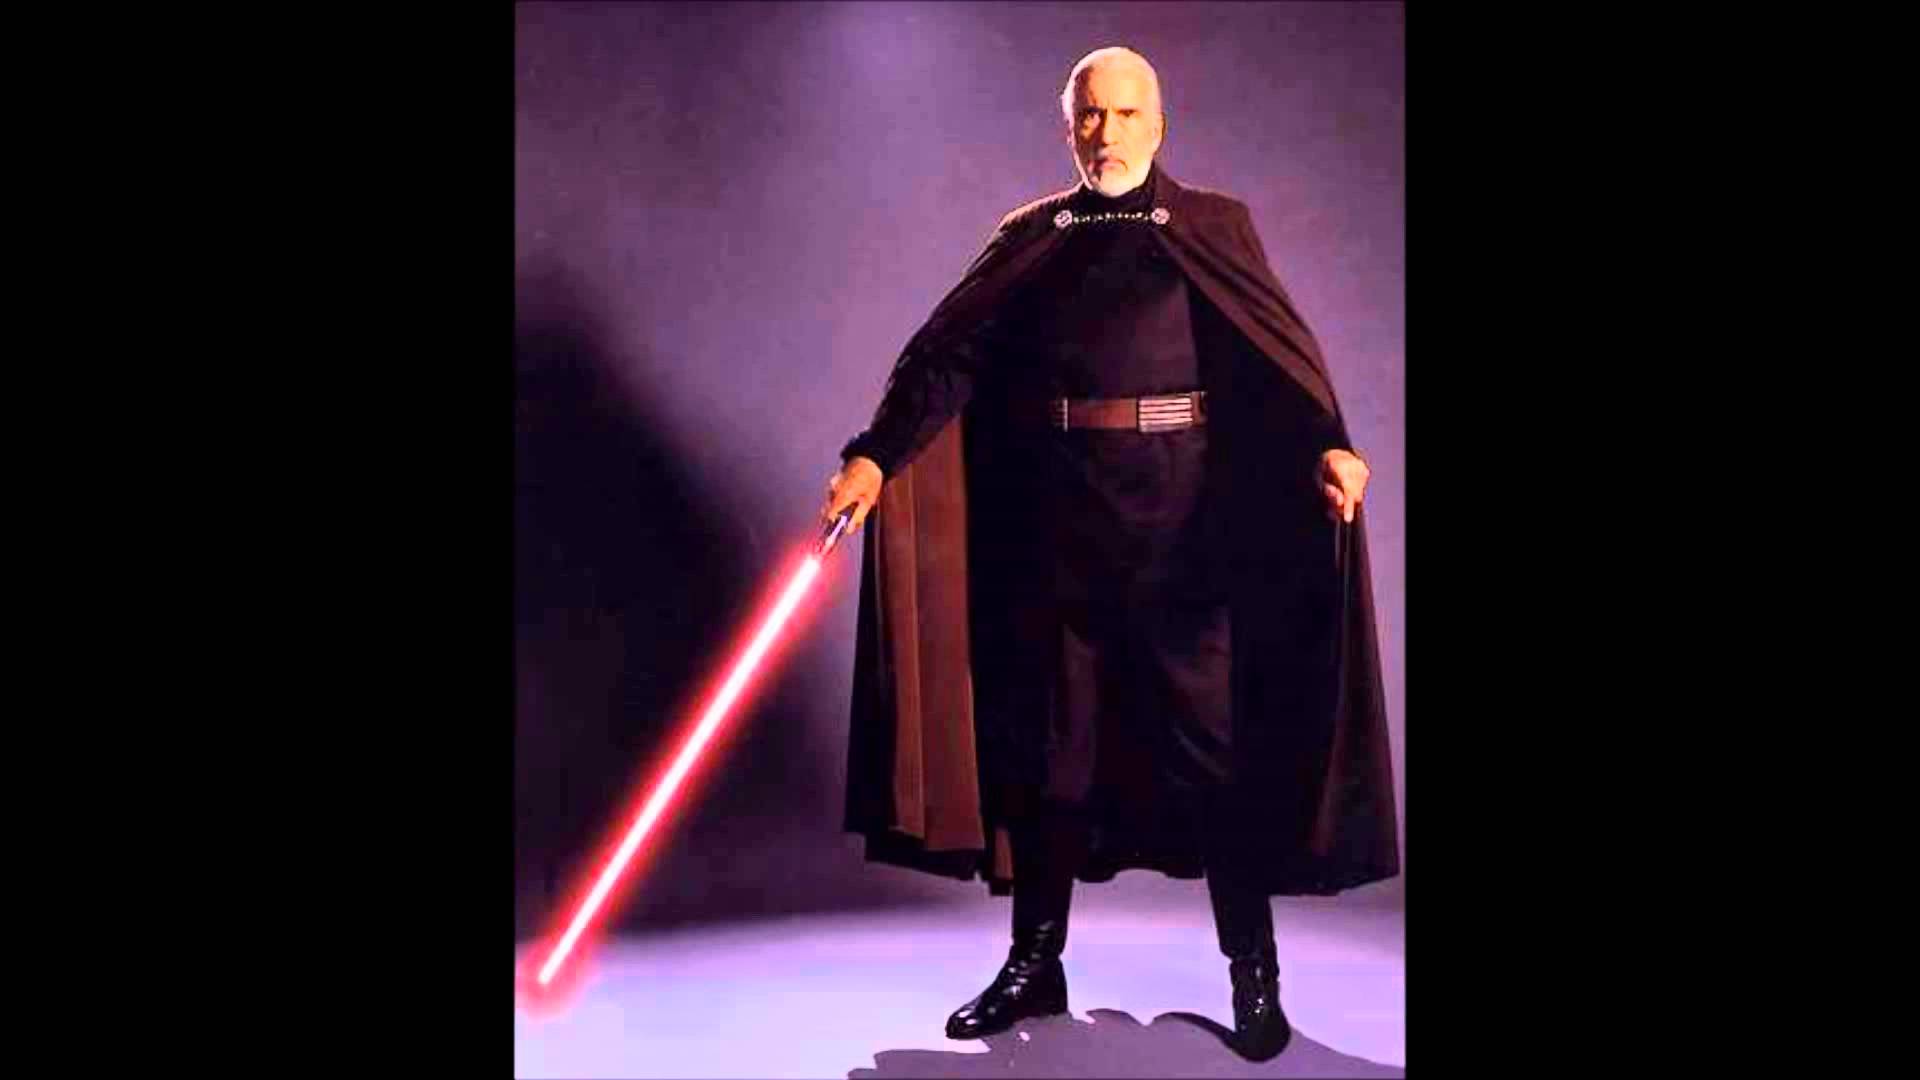 THE HISTORY OF COUNT DOOKU